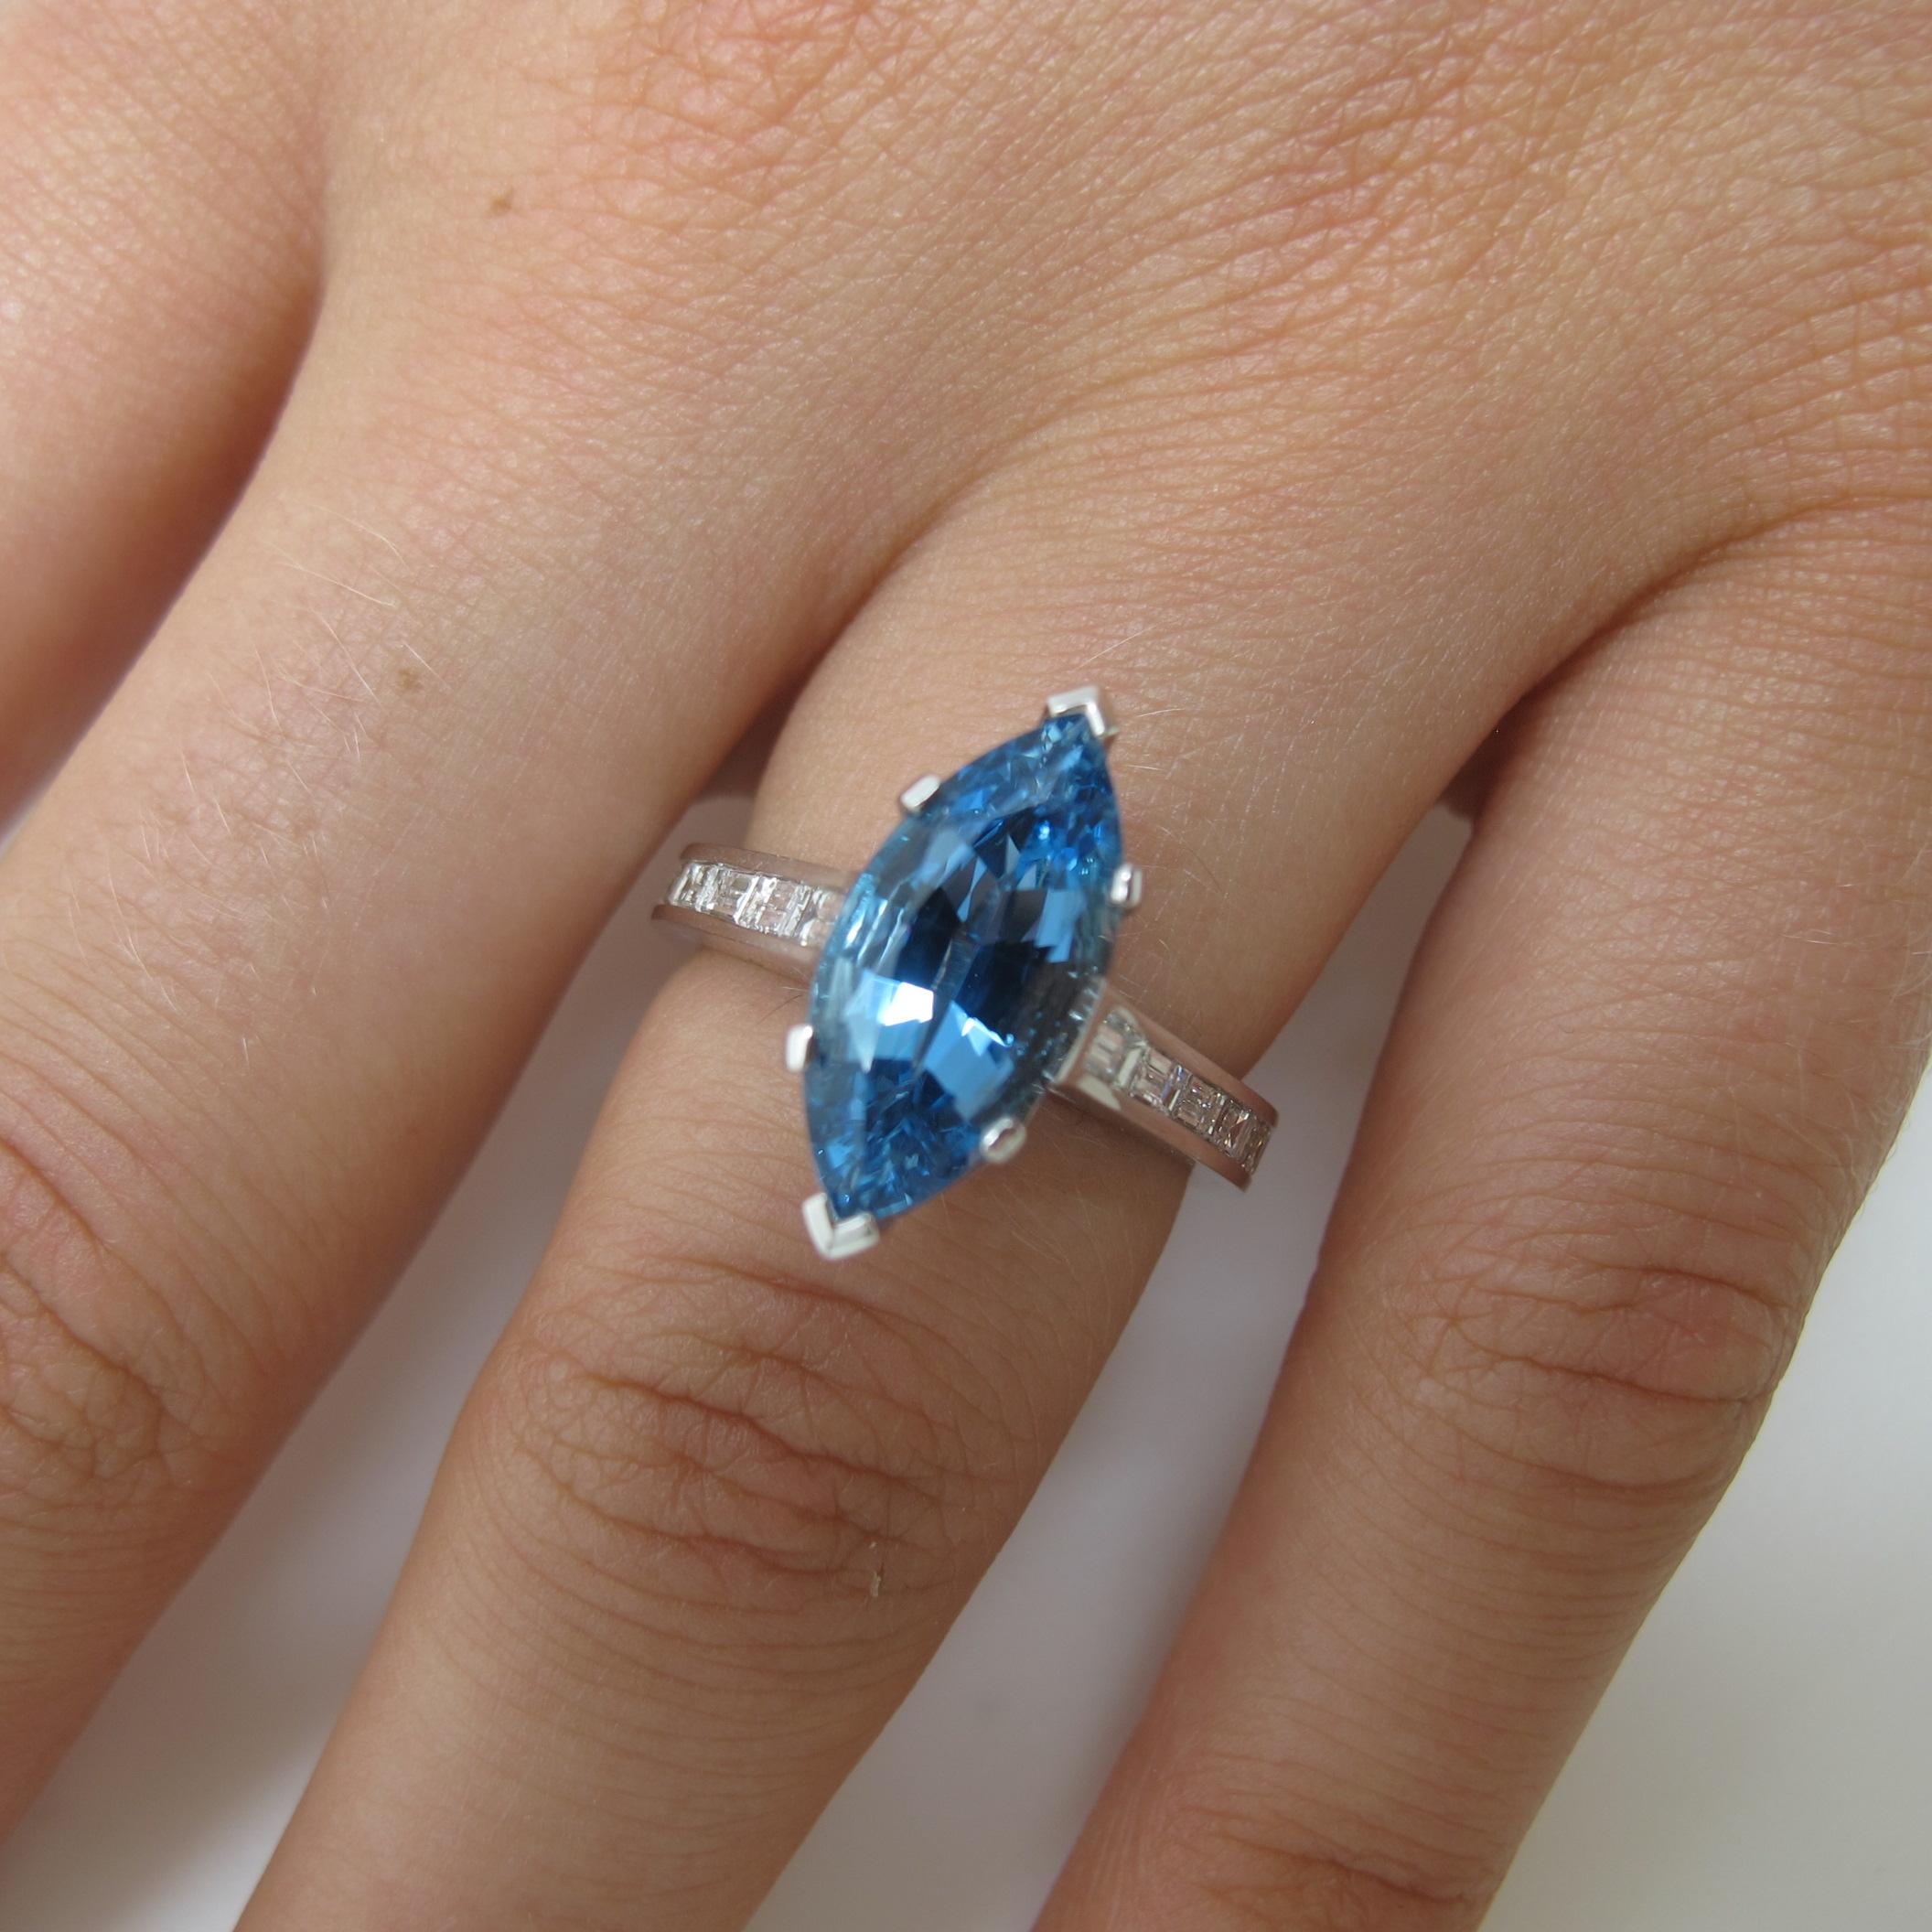 Seldom seen quality in aquamarine! This ultra dark blue stone is very rare, from the Santa Maria mine in Brazil. Marquise shapes are unusual in aquamarine. This one measures 14x7mm and weighs 2.68 carats.   Twelve baguette cut diamonds  with a total